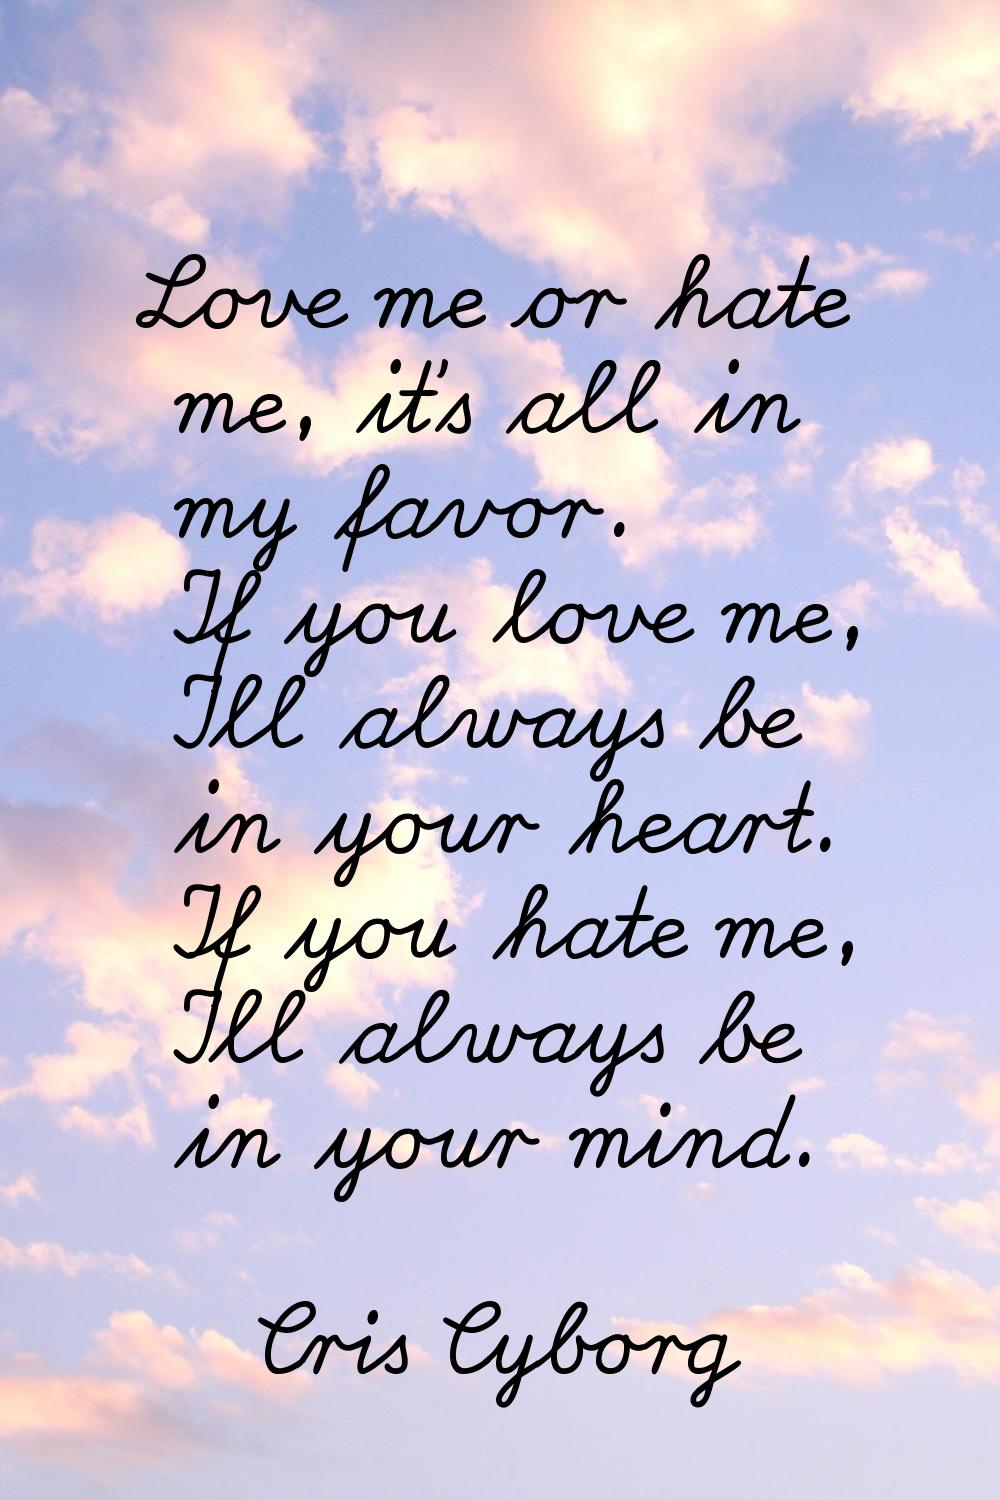 Love me or hate me, it's all in my favor. If you love me, I'll always be in your heart. If you hate